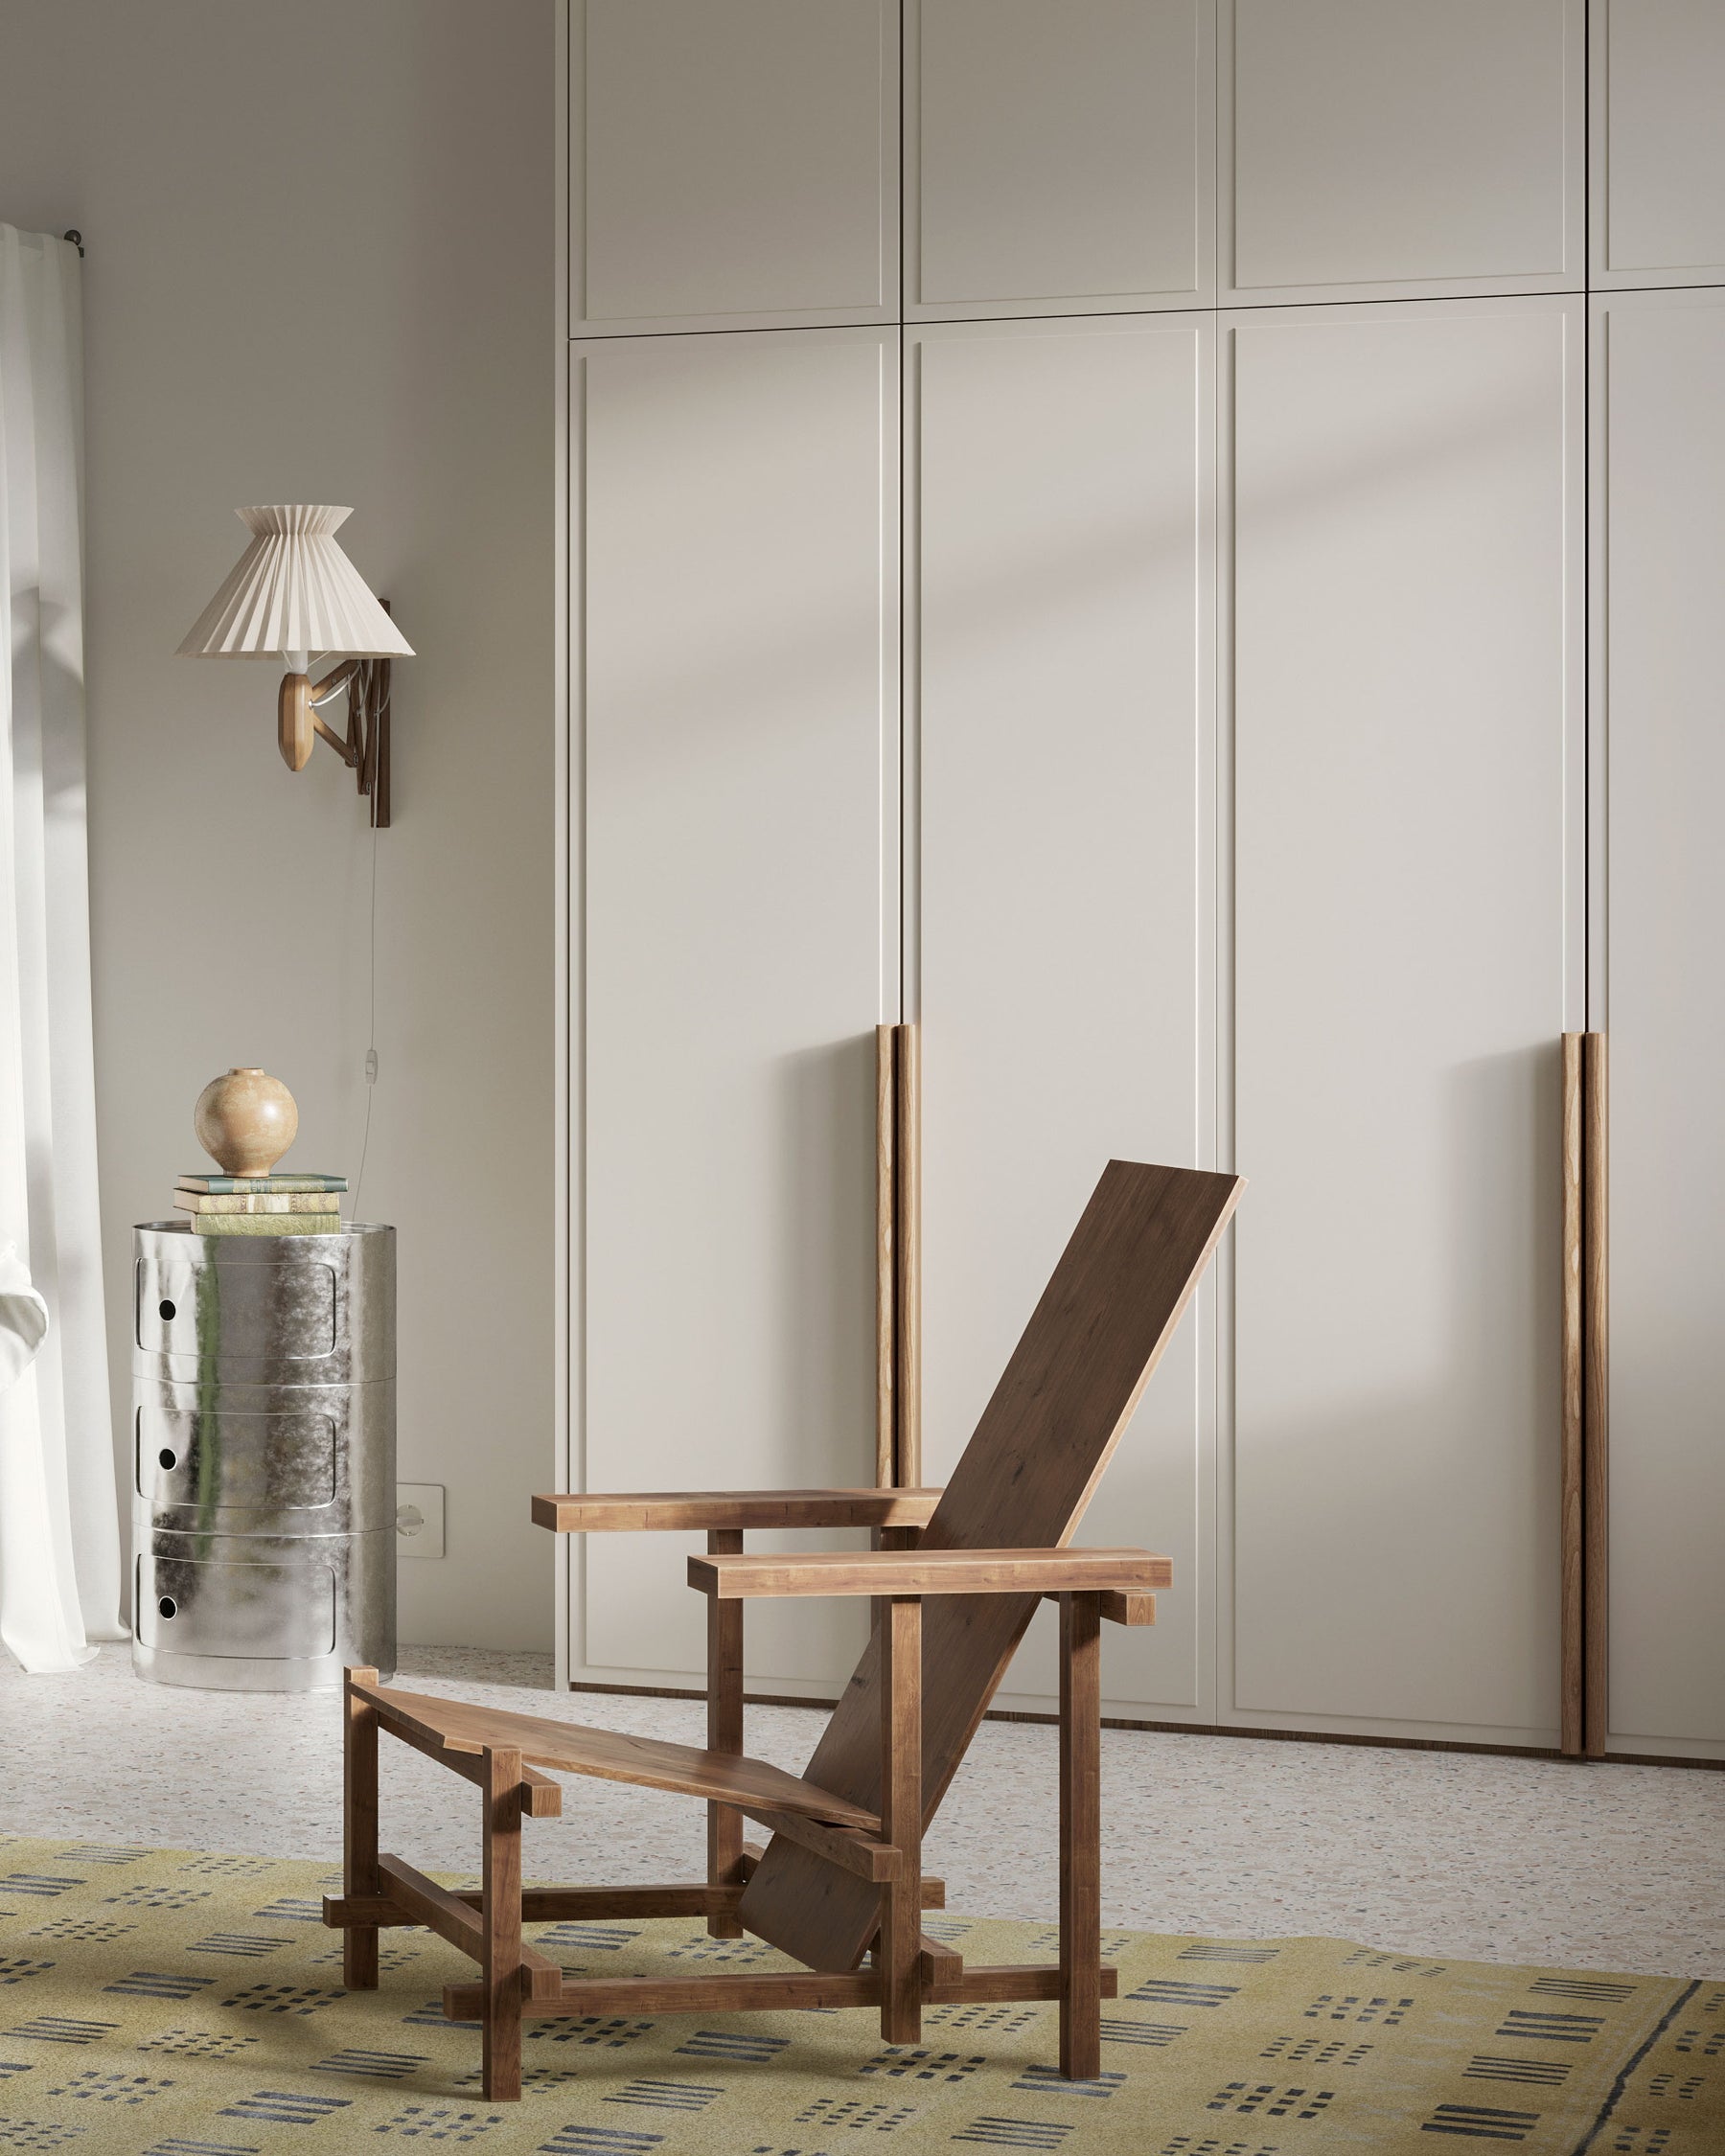 A.S.Helsingö Lalax built-in wardrobe with IKEA PAX frames